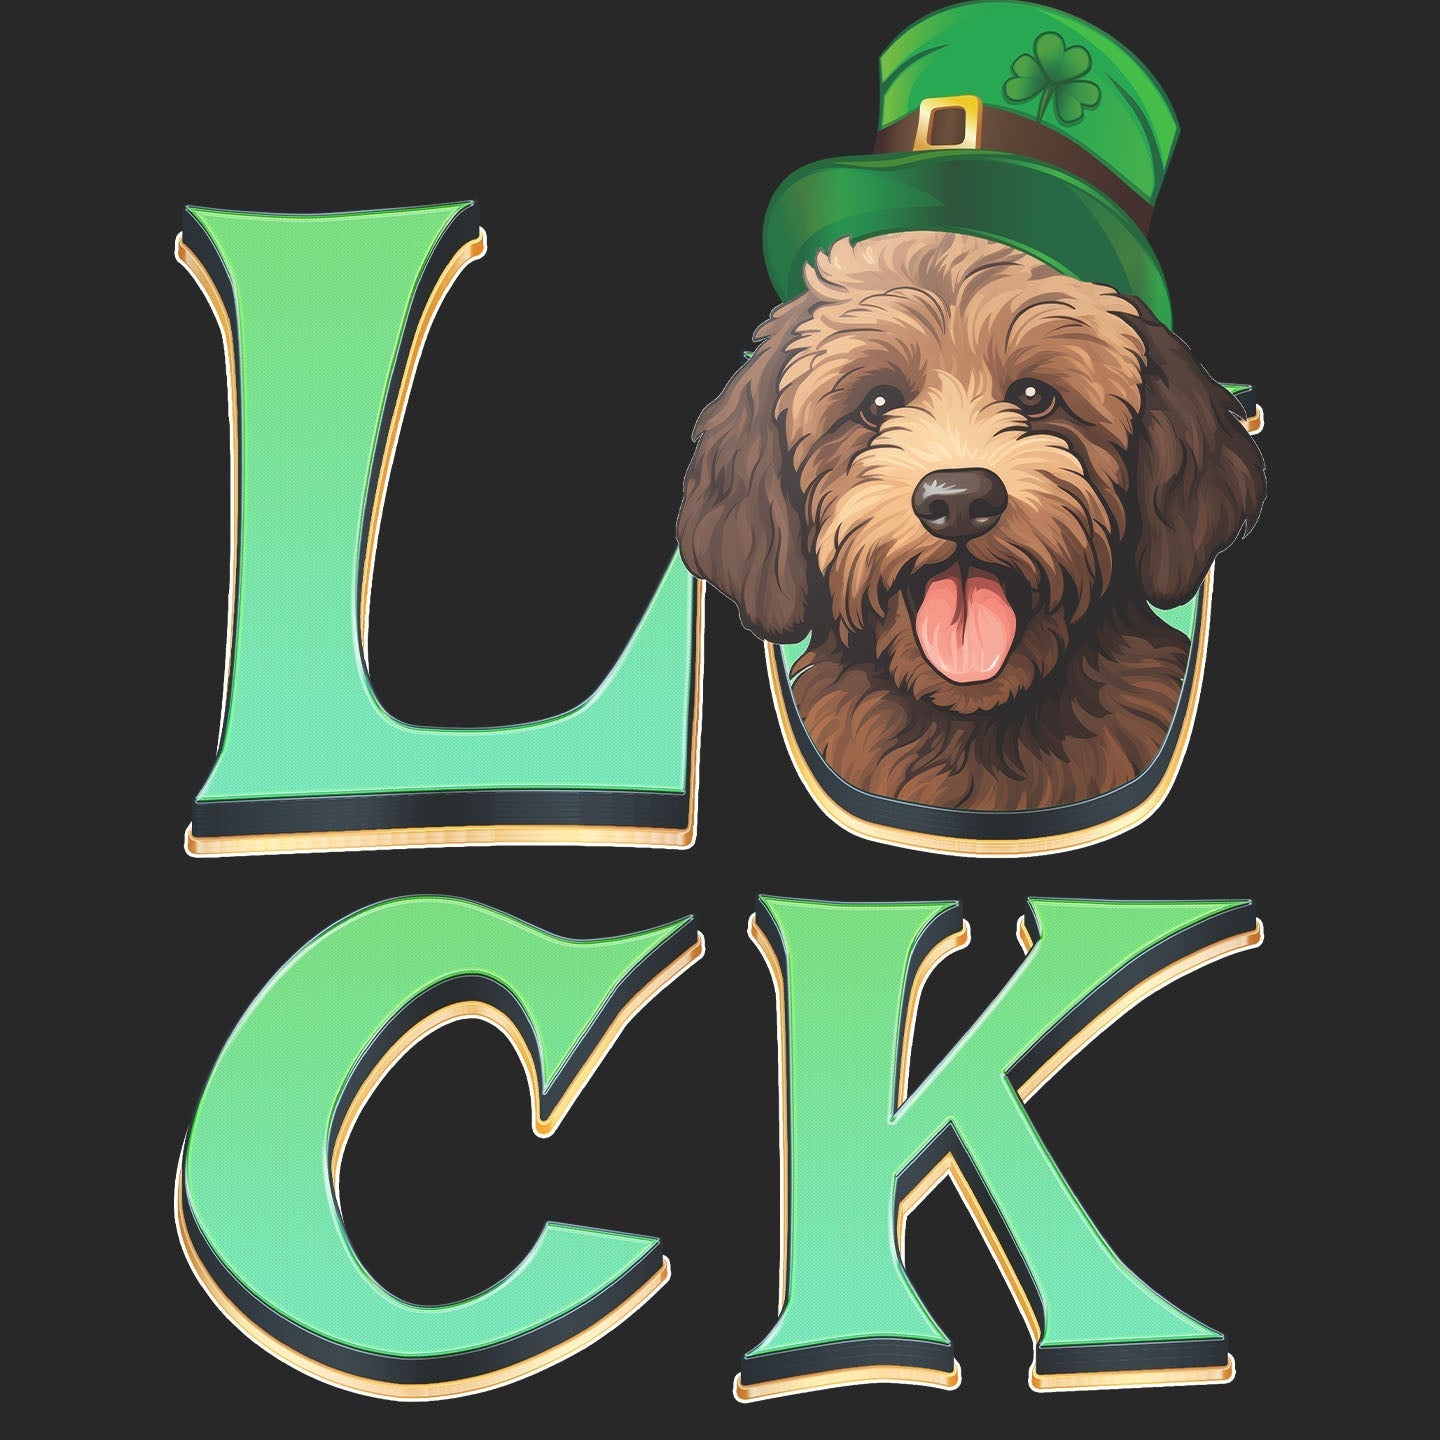 Big LUCK St. Patrick's Day Labradoodle (Chocolate) - Adult Unisex T-Shirt